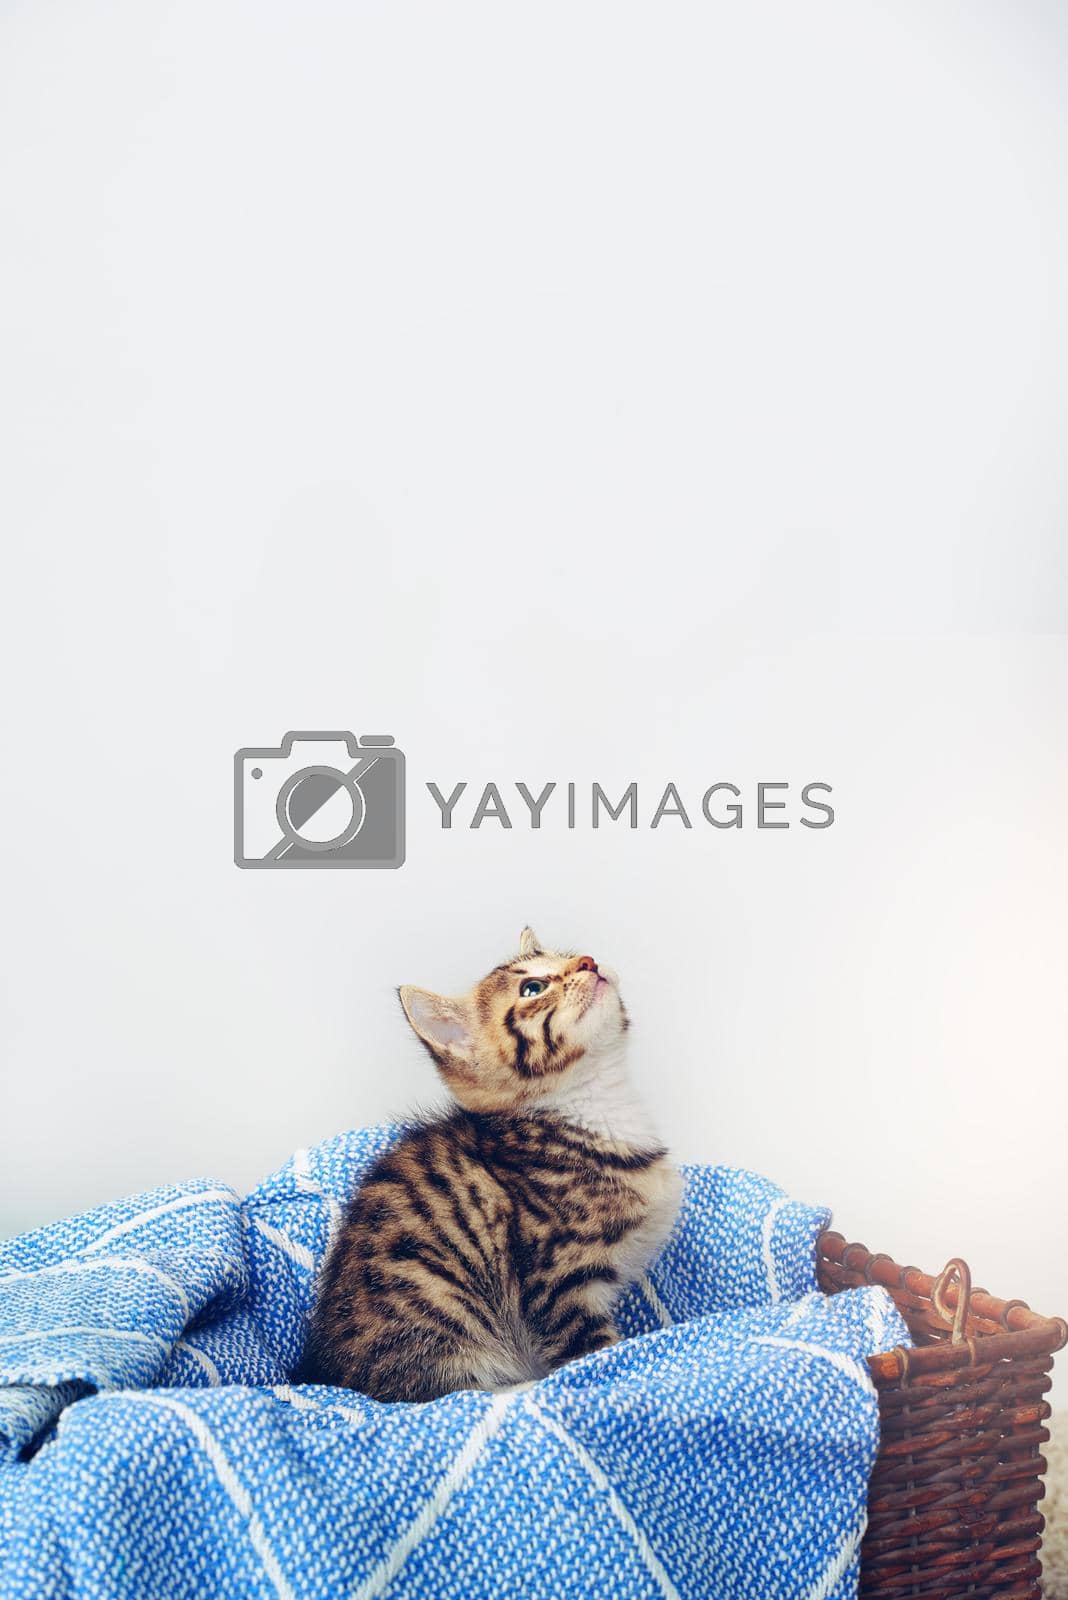 Studio shot of an adorable tabby kitten sitting on a soft blanket in a basket.